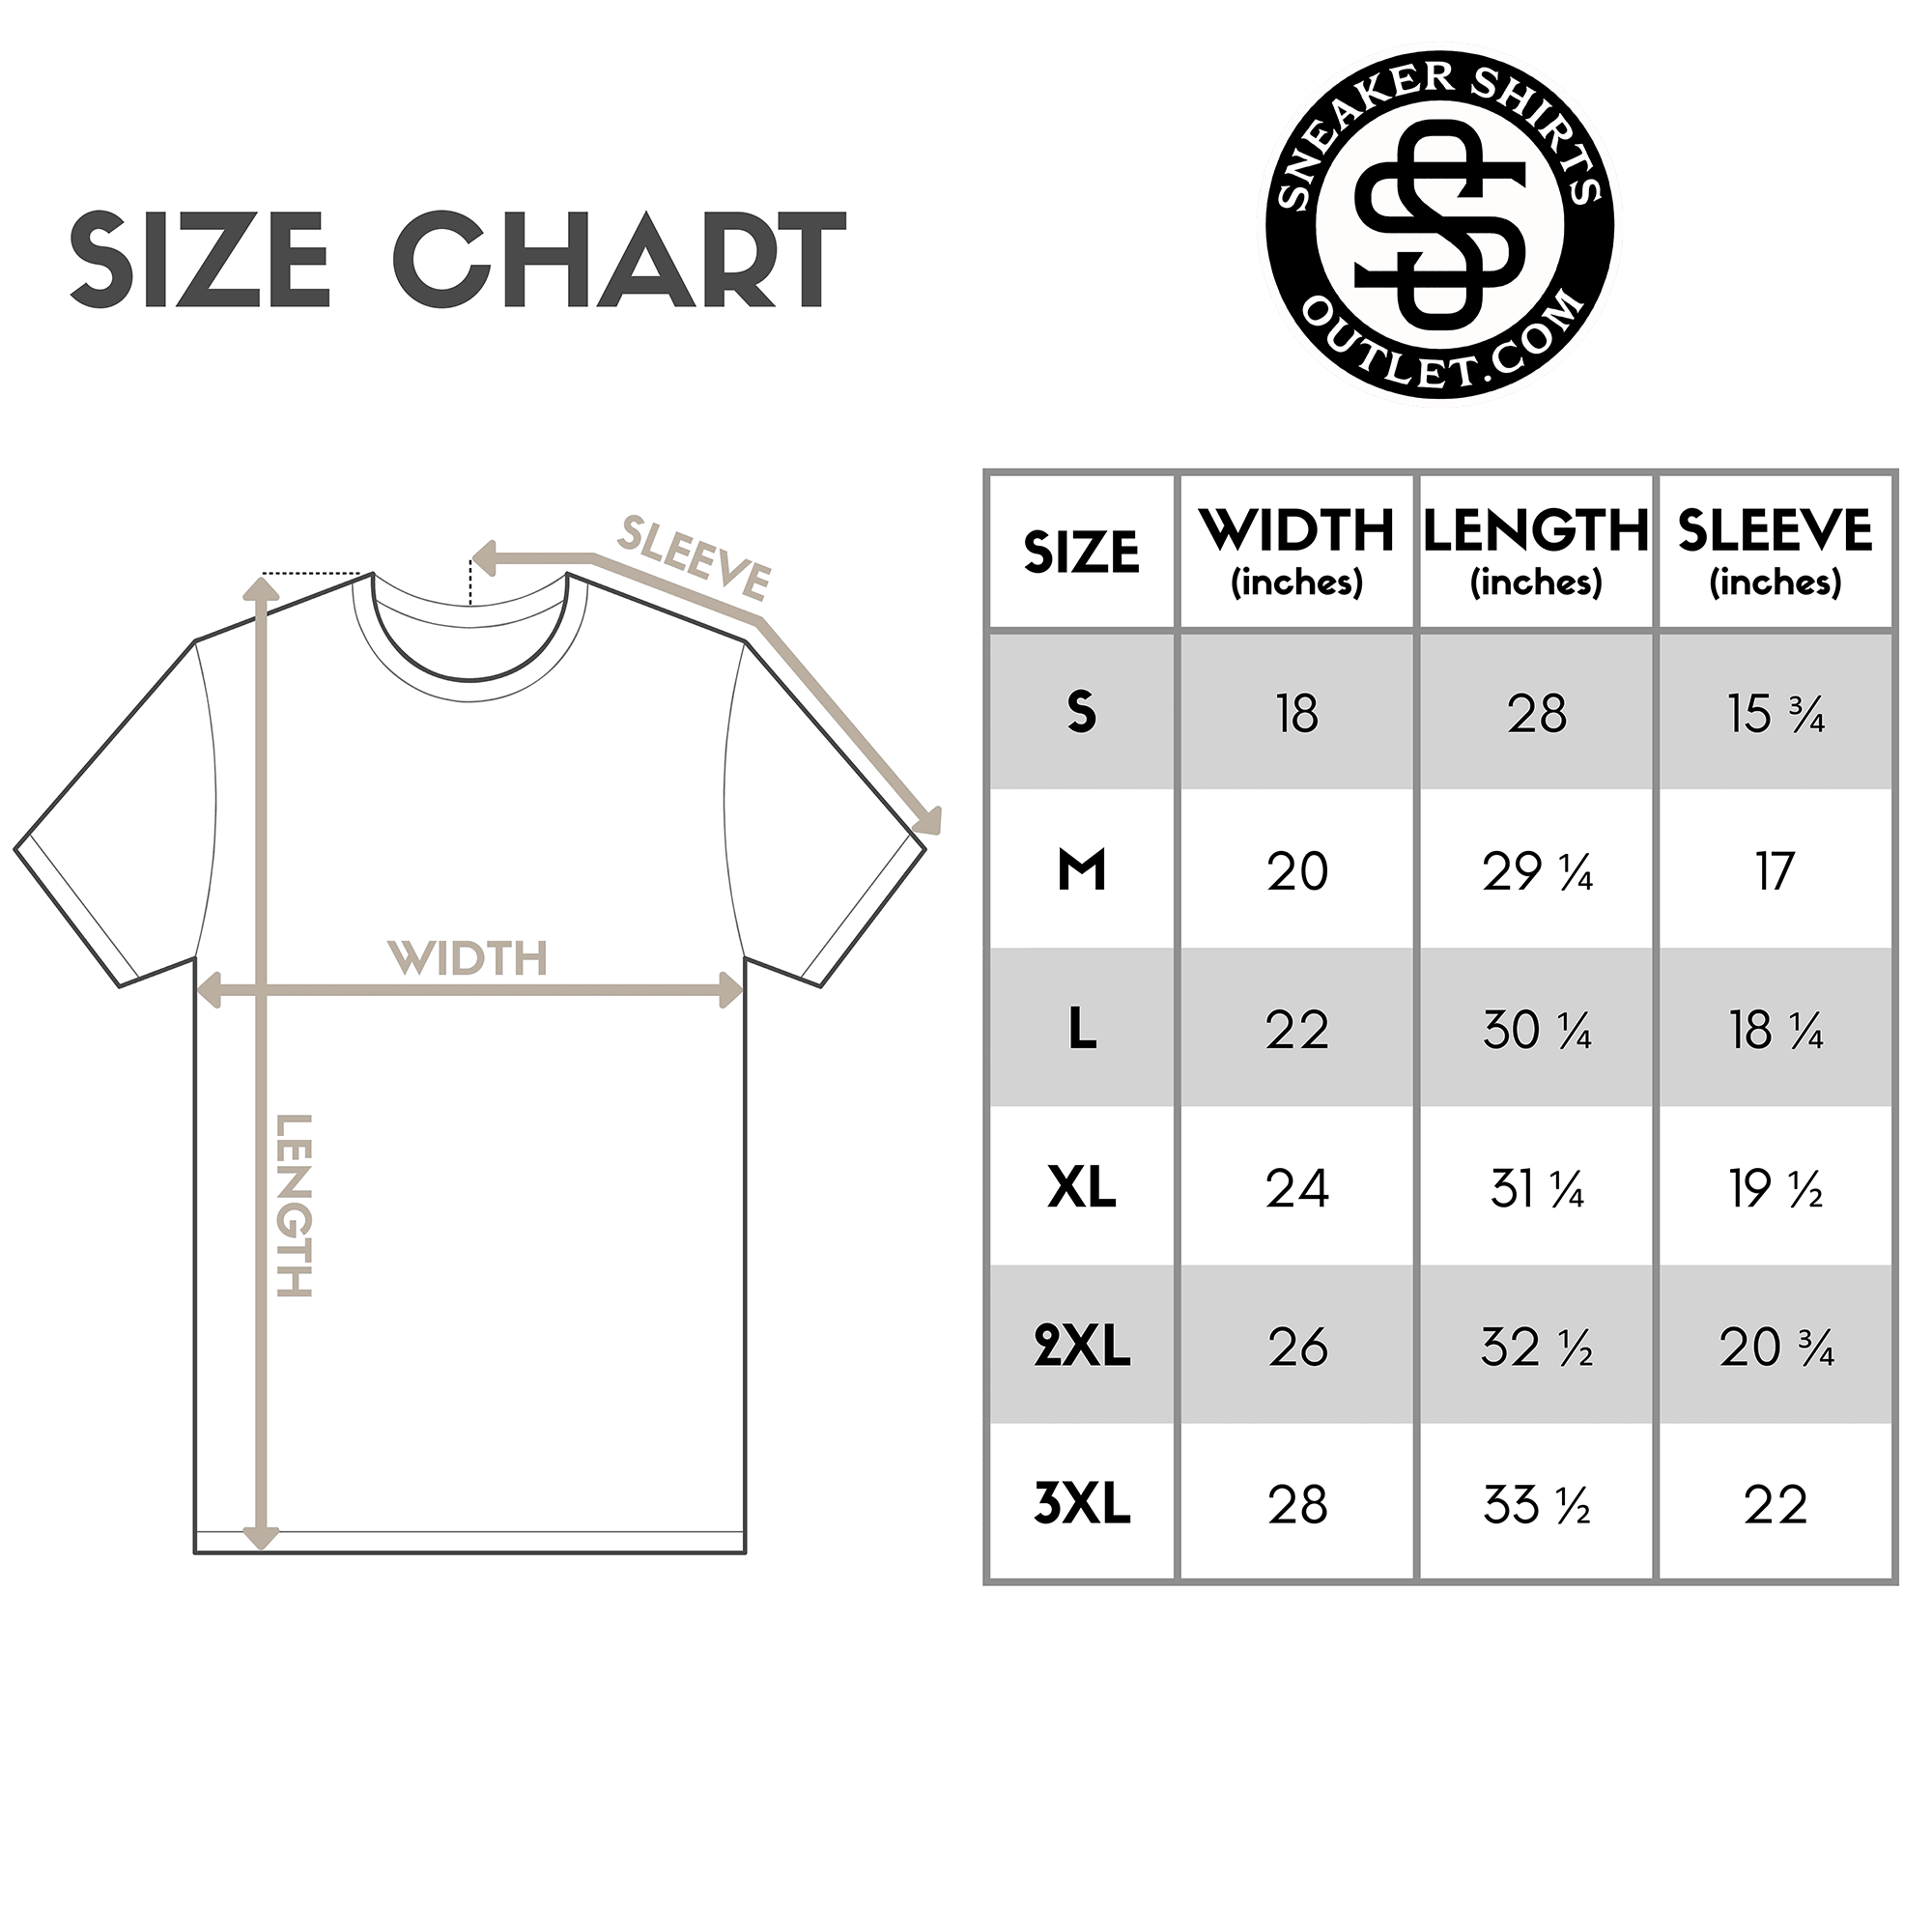 Slay Sneaker Shirt size chart for Nike SB Dunk By Any Means photo